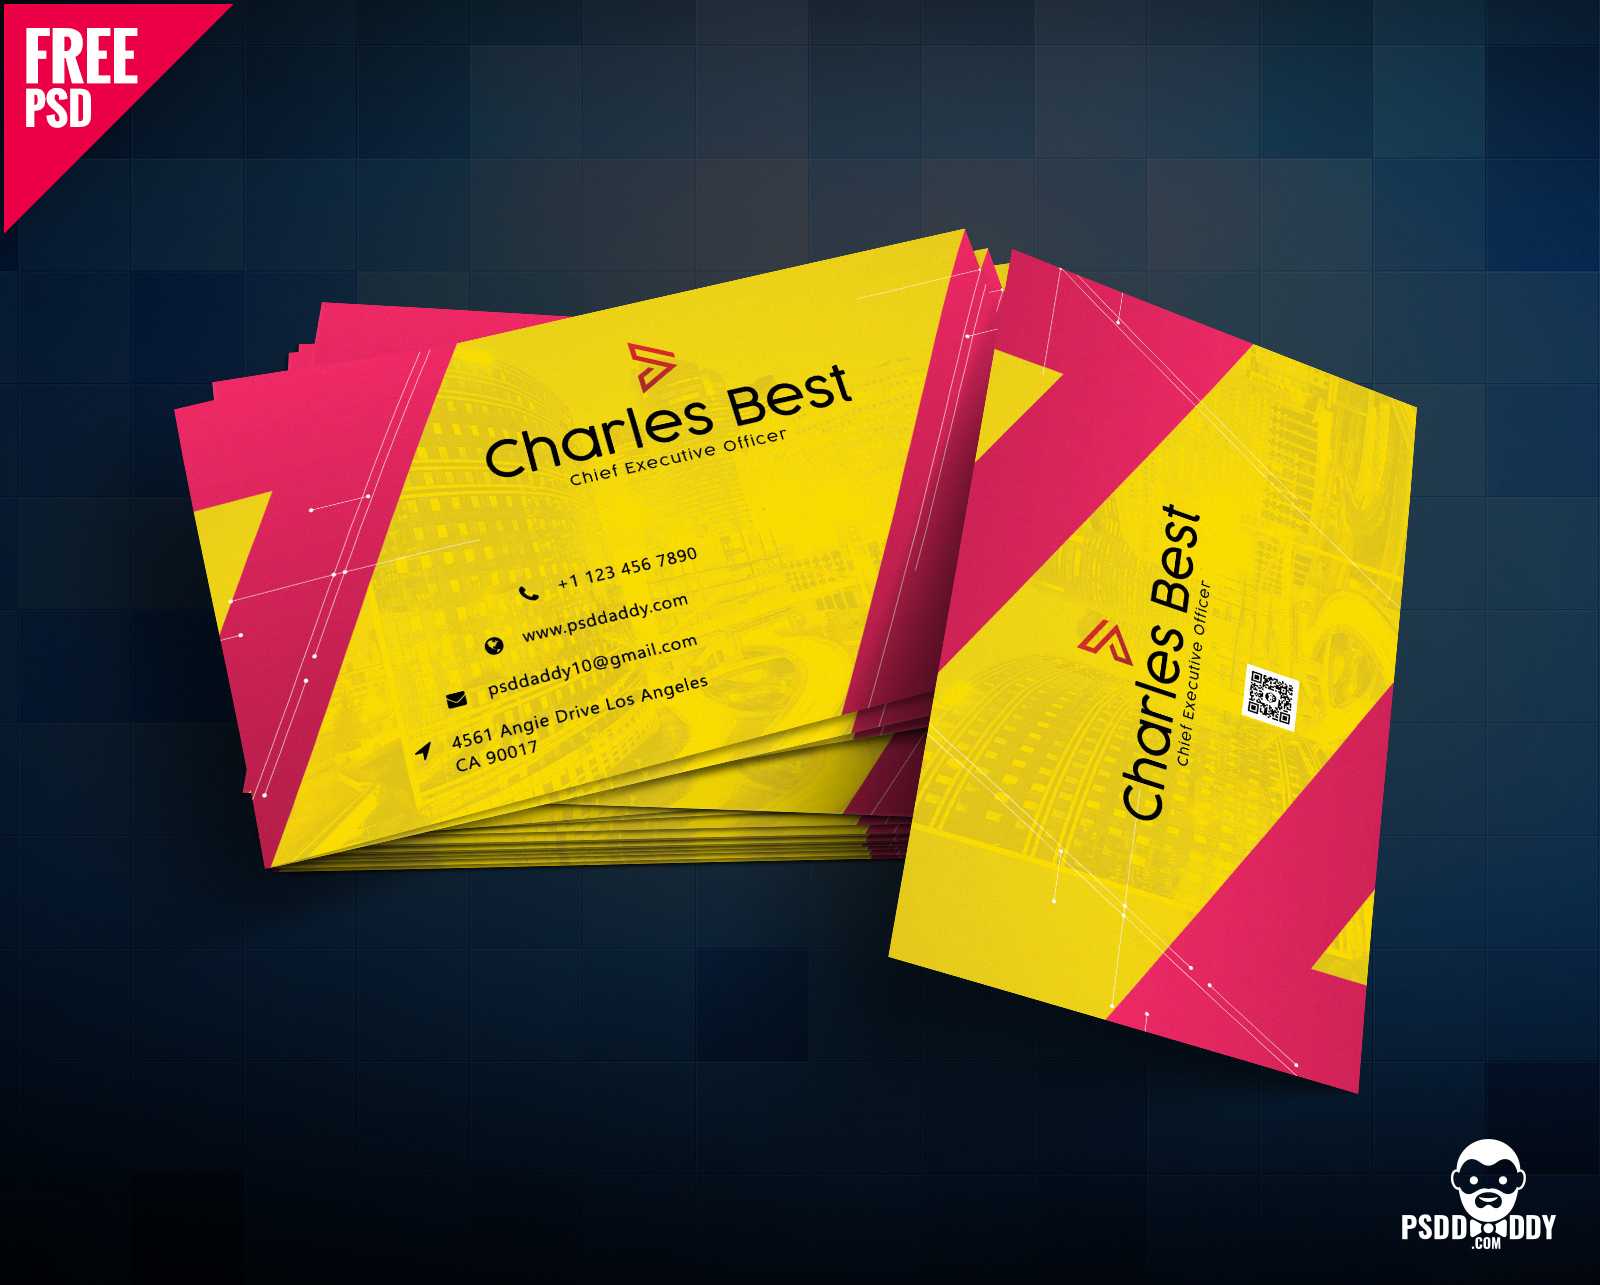 Download] Creative Business Card Free Psd | Psddaddy With Free Psd Visiting Card Templates Download